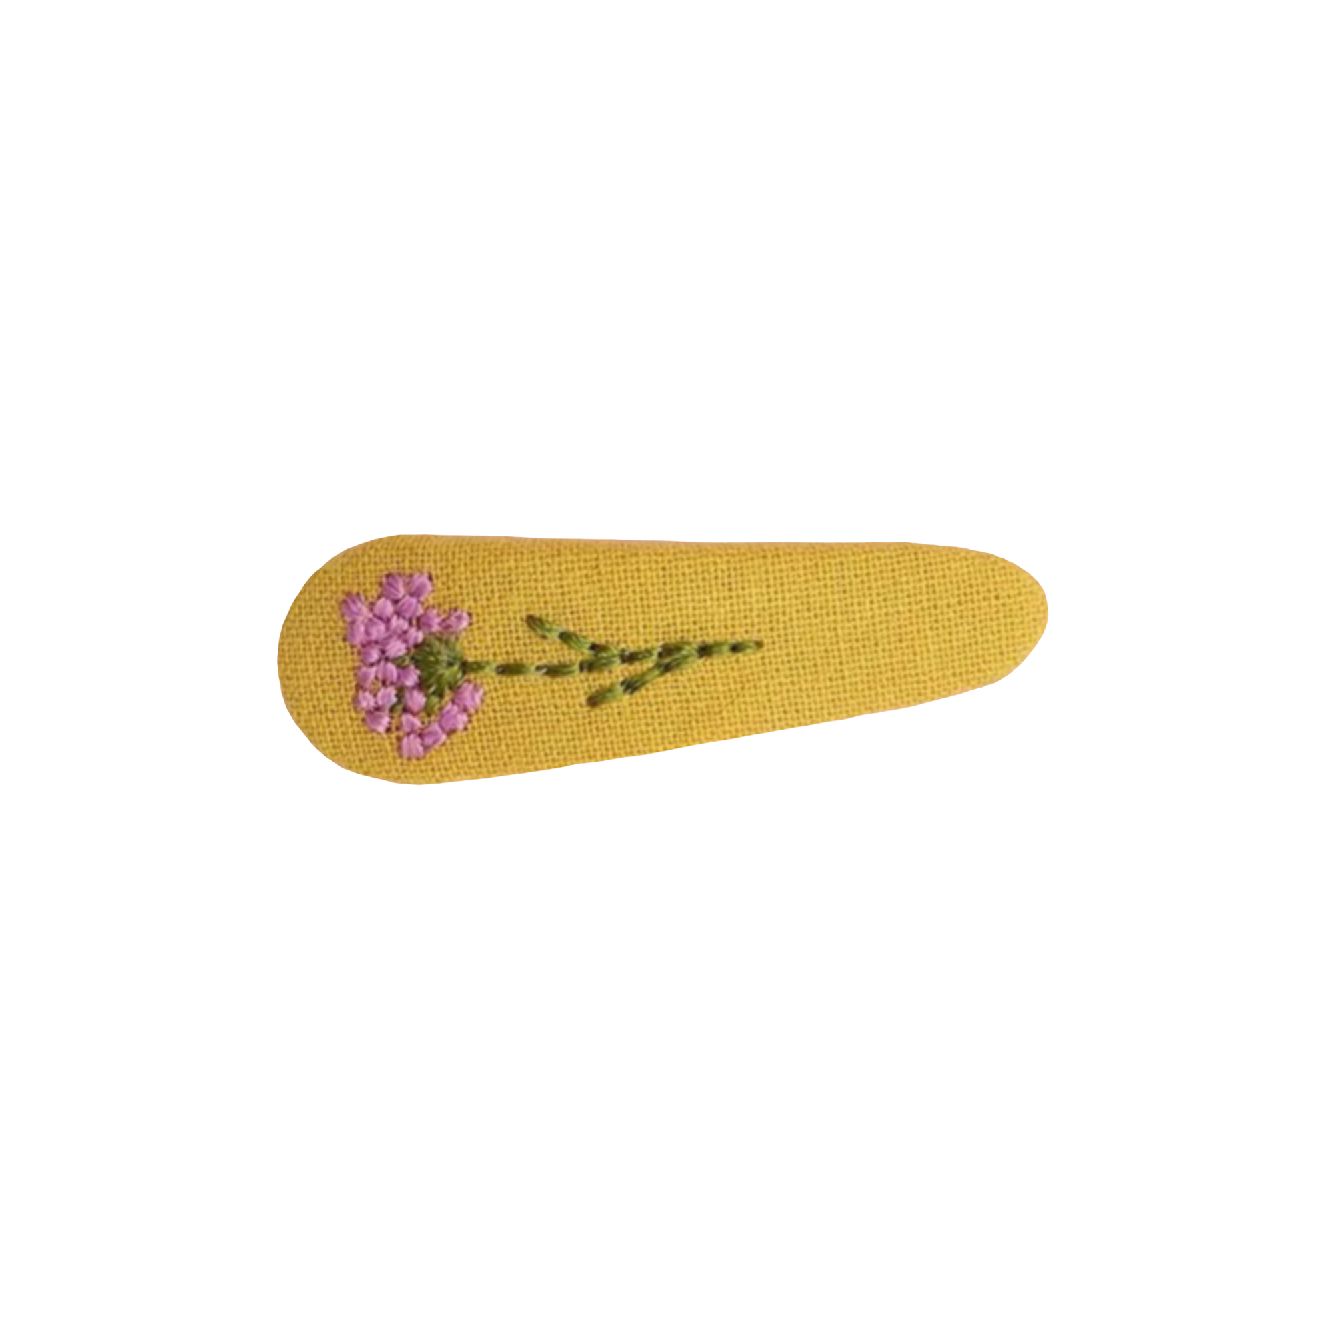 'Embroidered Flower' Hair Clip in Mustard and Lilac